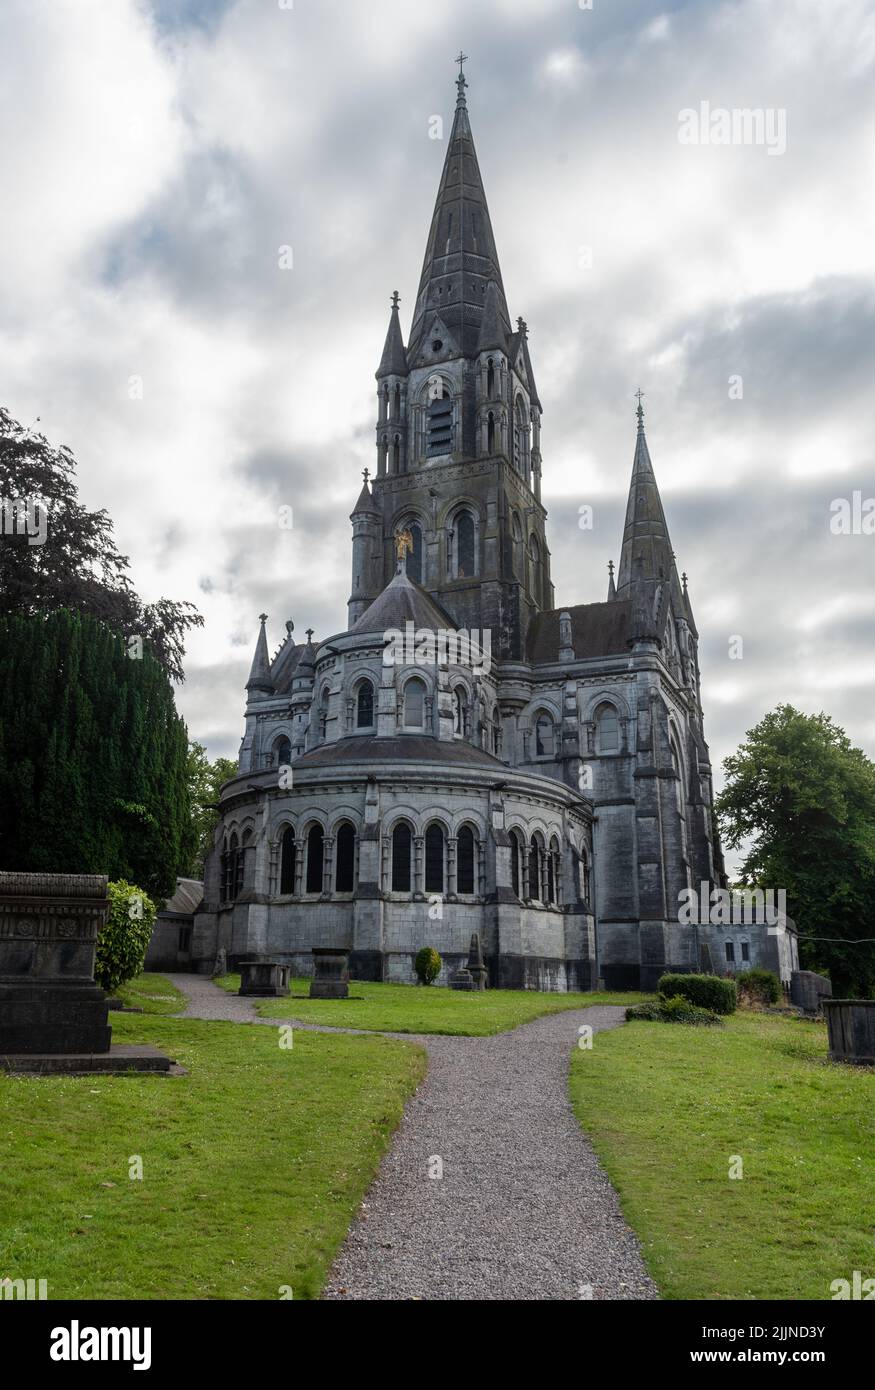 Saint fin barres Anglican cathedral in Cork Ireland in the evening Stock Photo